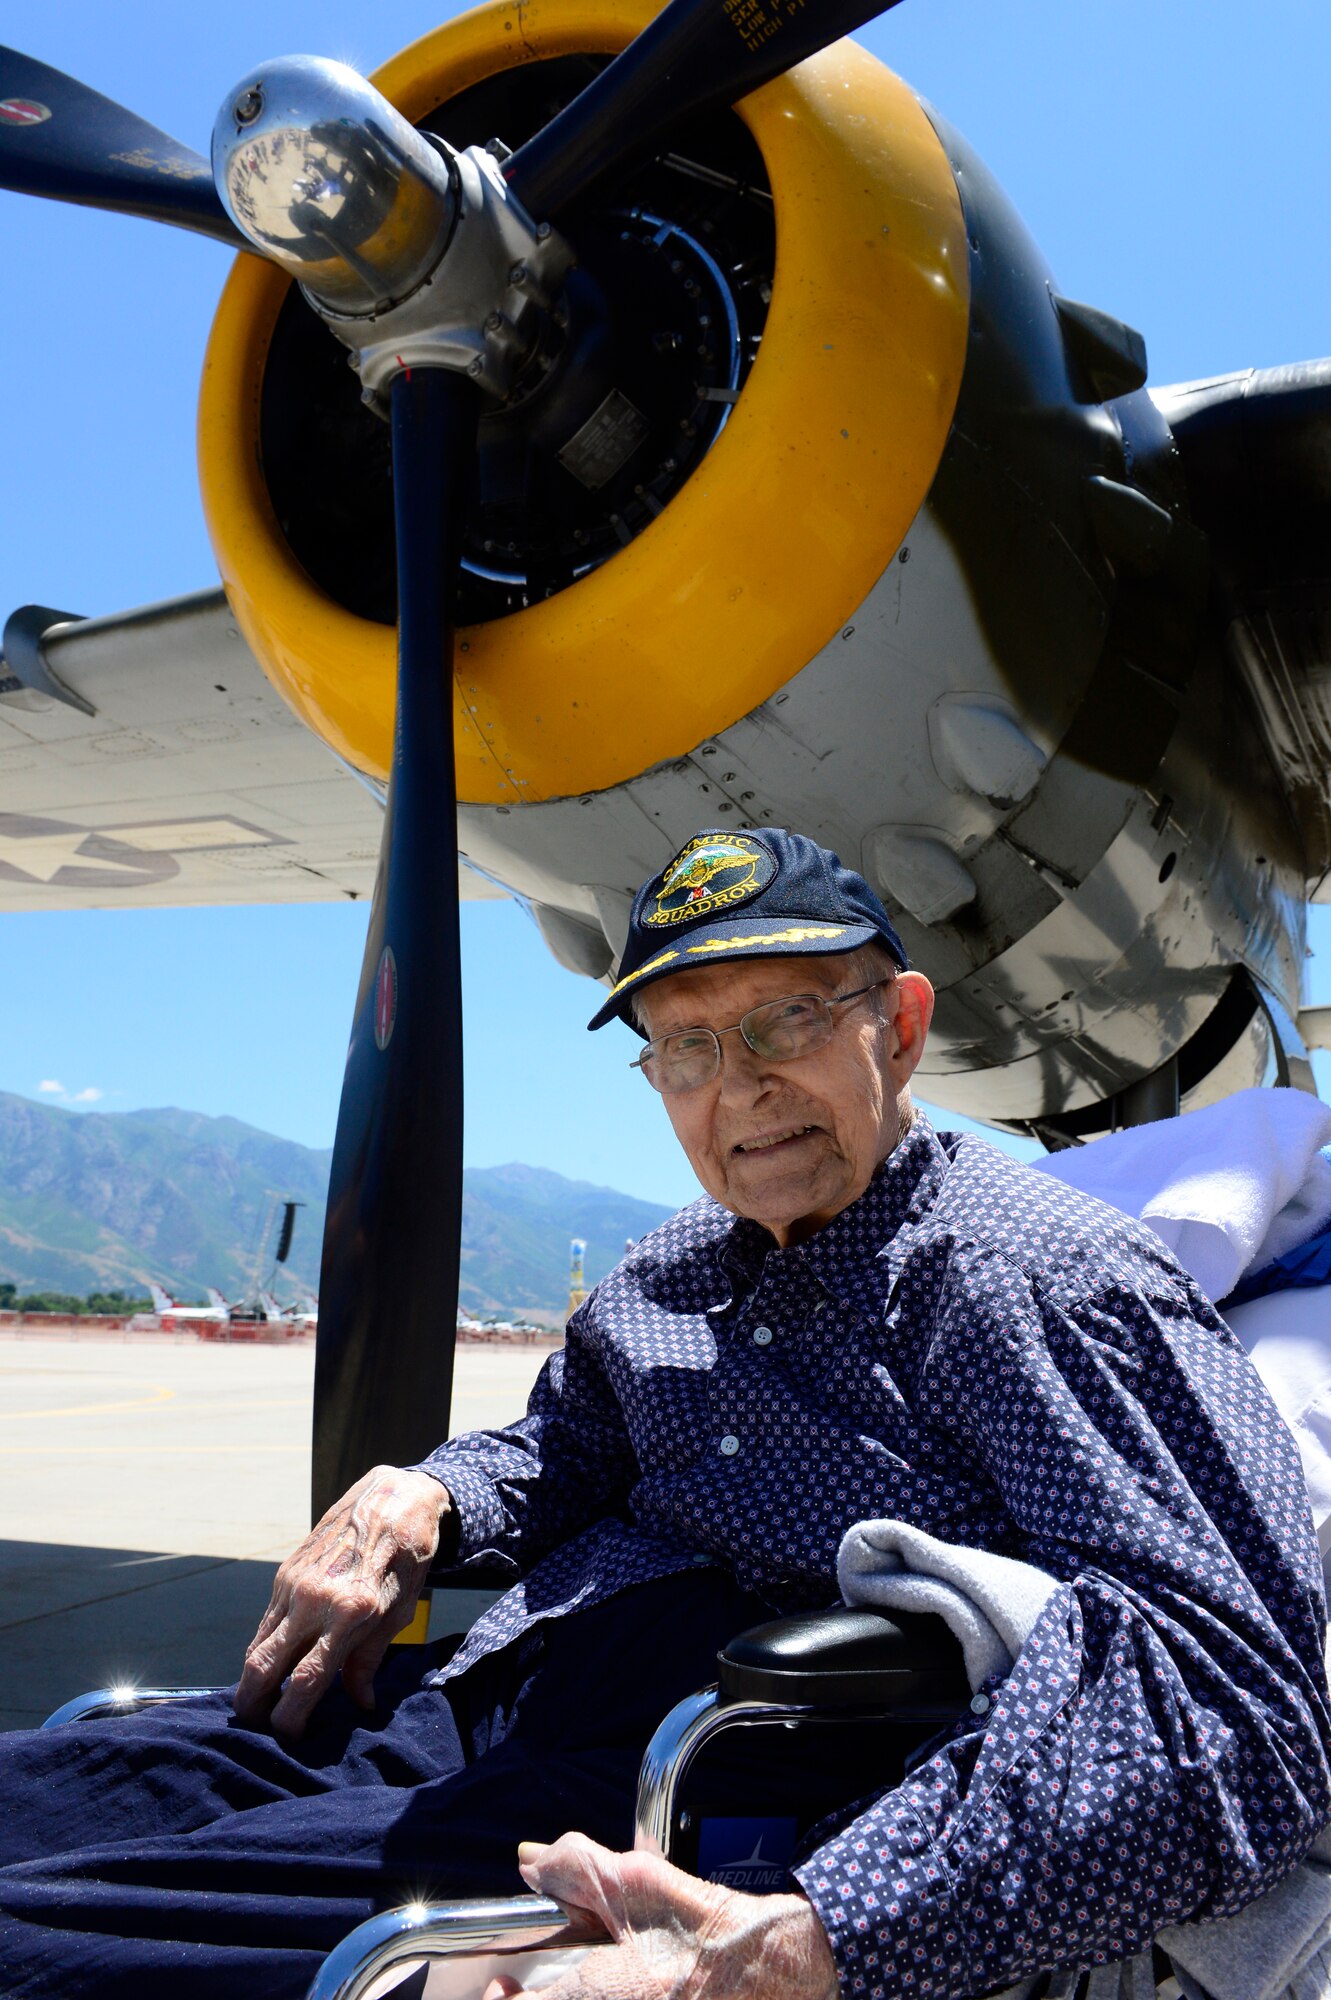 Donald Nesbit, a World War II veteran, poses in front of the engine of a B-25 bomber June 22, 2018, at Hill Air Force Base, Utah. The bomber was on display for the Warriors Over the Wasatch Air and Space Show. (U.S. Air Force photo by David Perry)